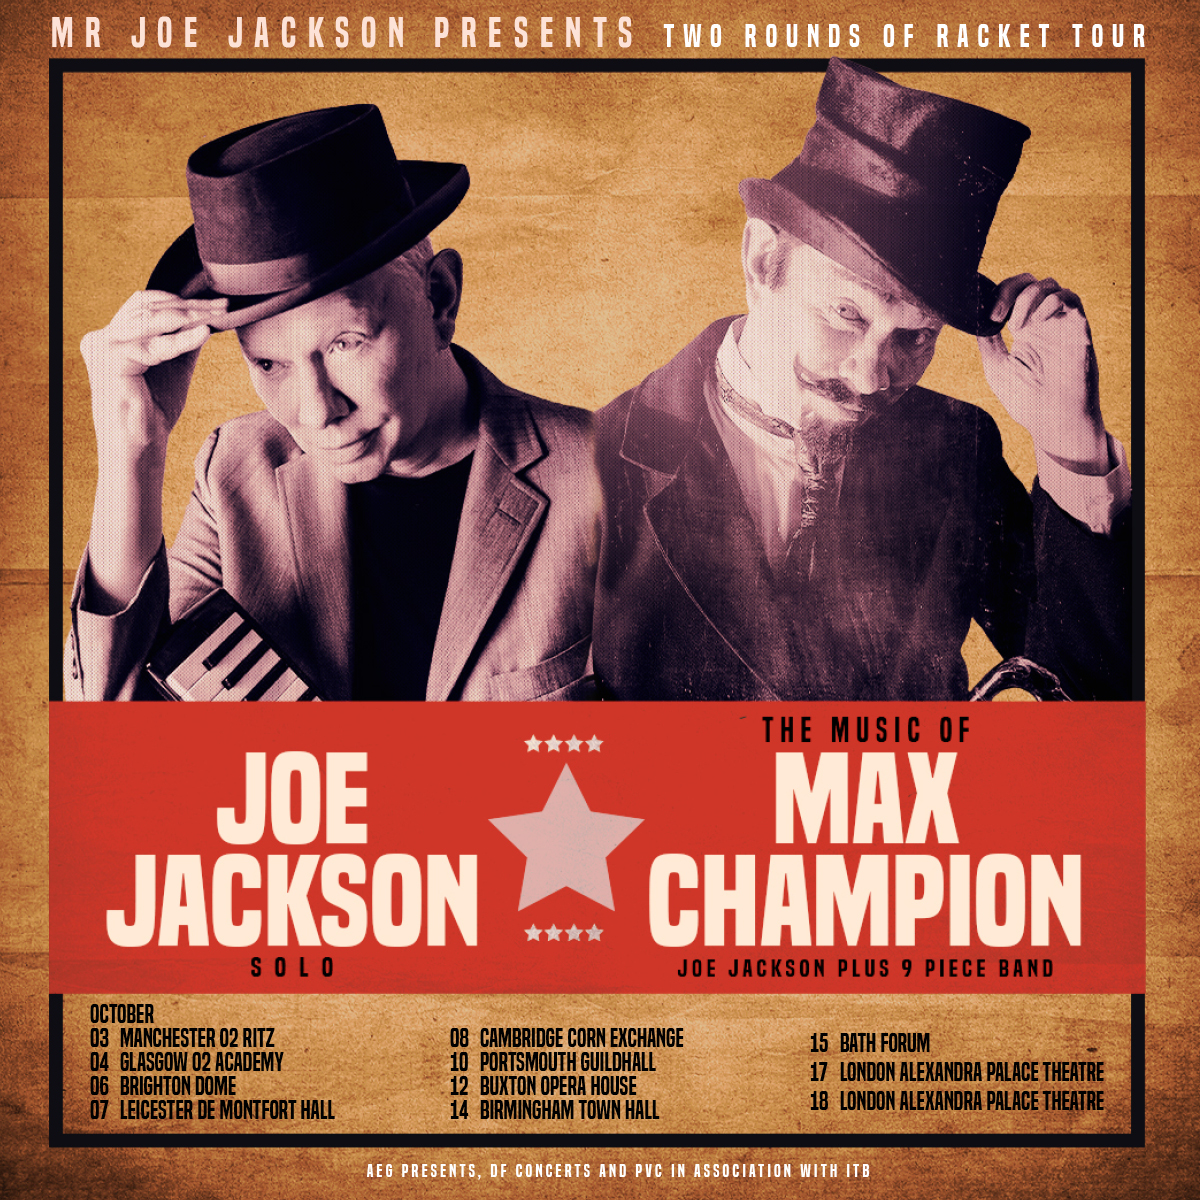 🎵🎉 Get ready for an incredible musical journey with @JoeJacksonMusic Presents: Two Rounds of Racket Tour in October 2024! 🌟 Don't miss the chance to experience the iconic Joe Jackson live on stage! ⏰ Tickets available now 🎫 w.axs.com/Hxmn50QTw4O